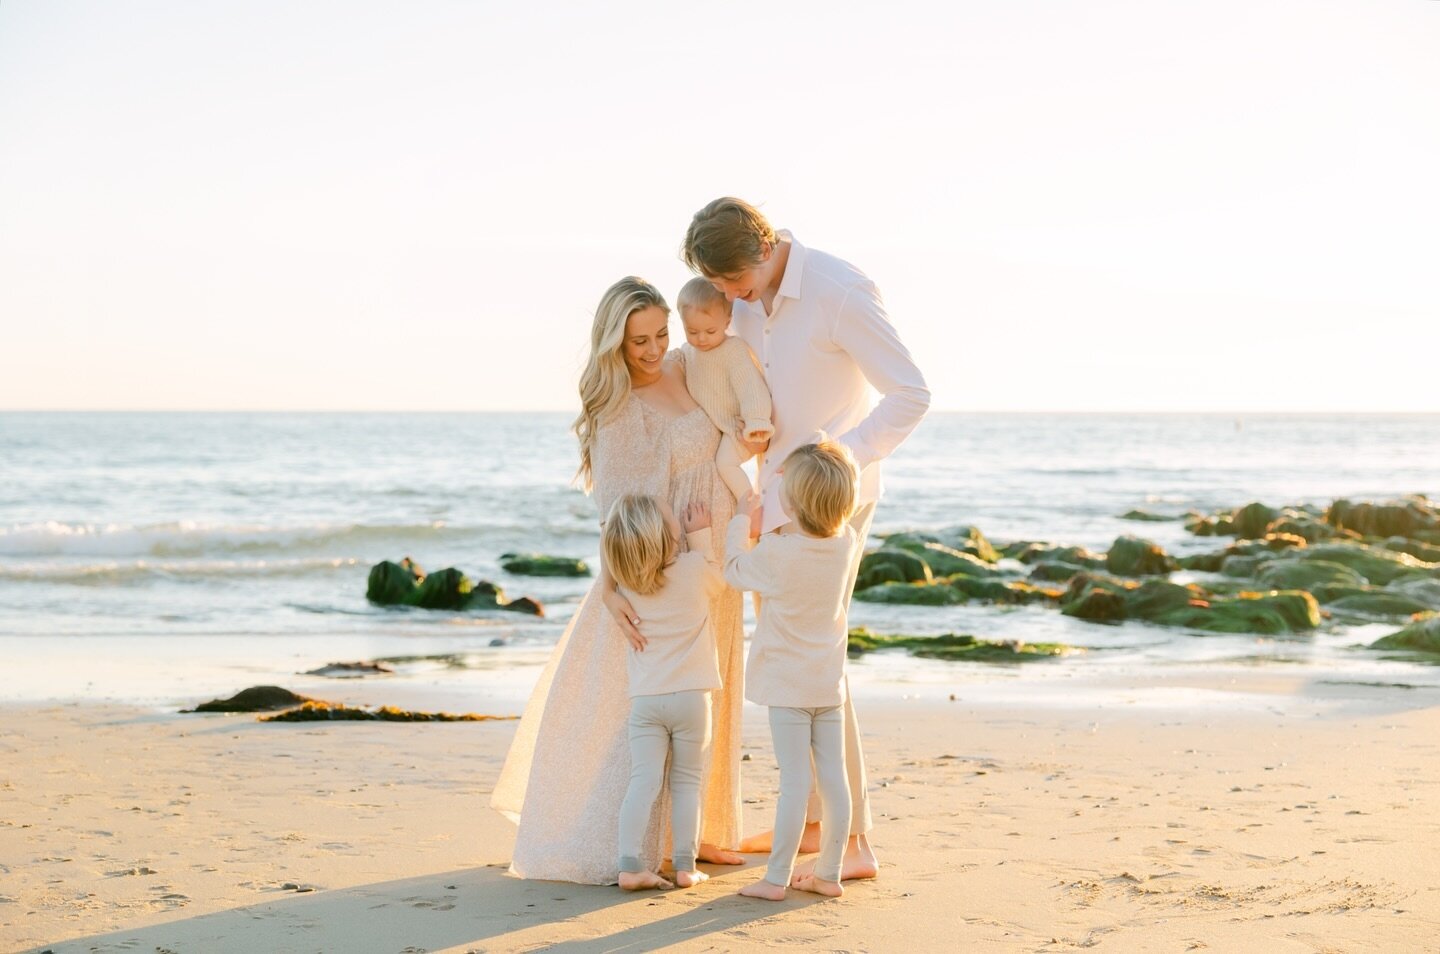 A family session at the beach is always a good idea! Post holiday rush, and just the most special way to document your life with your little ones. 

#NewportBeachFamilyPhotographer
#FamilyPhotographyOC
#NewportBeachKids
#OrangeCountyFamilies
#FamilyP